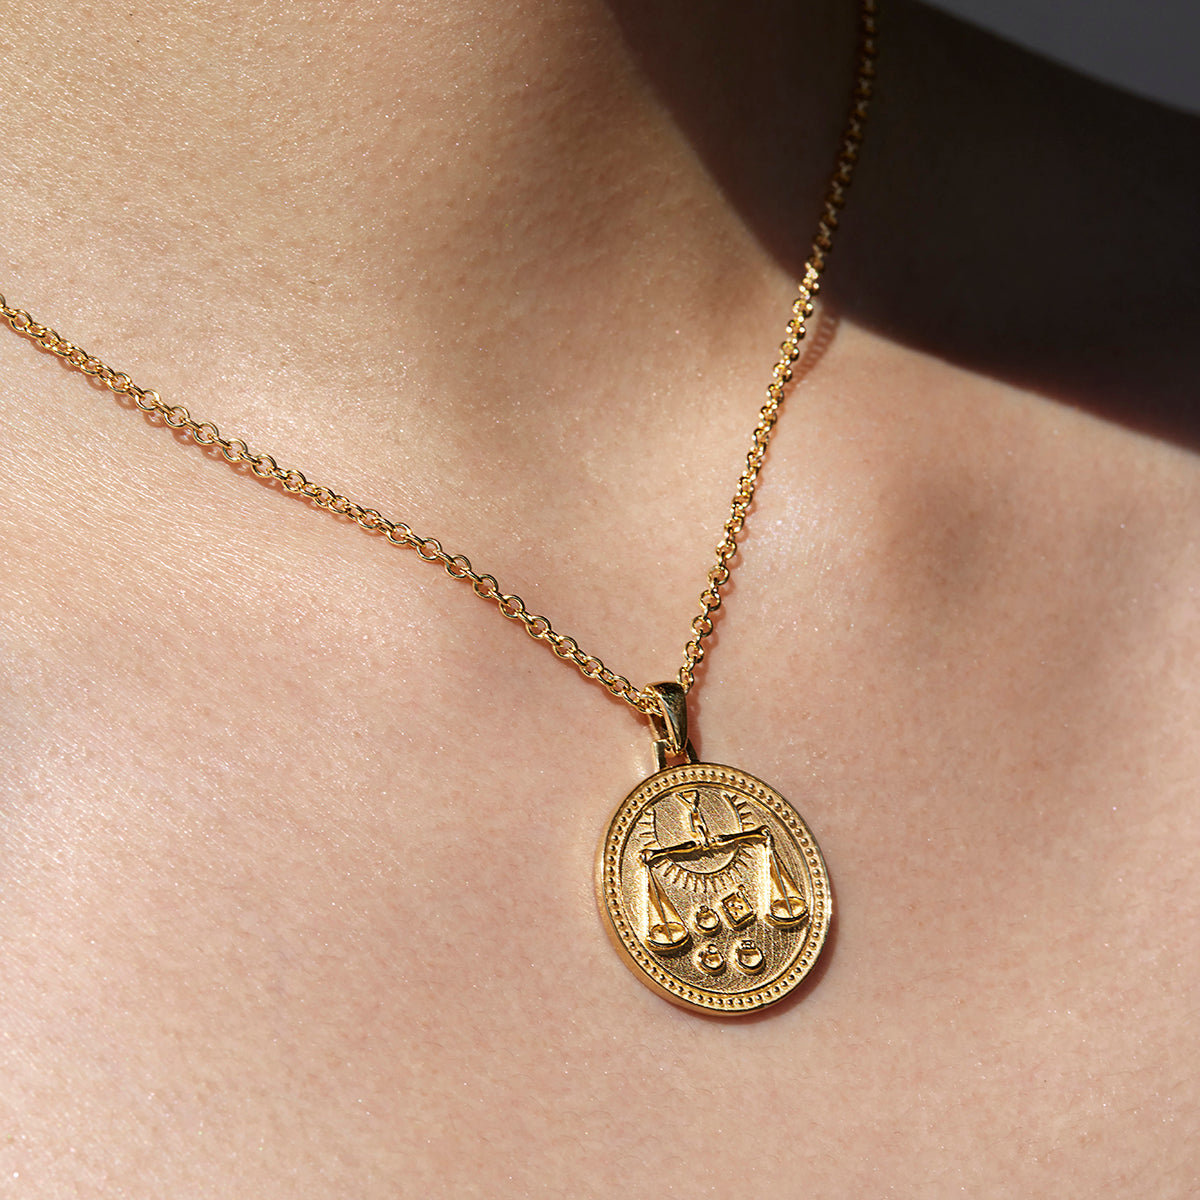 Close up of Libra Ethical Gold Pendant Necklace Being Worn Against Skin